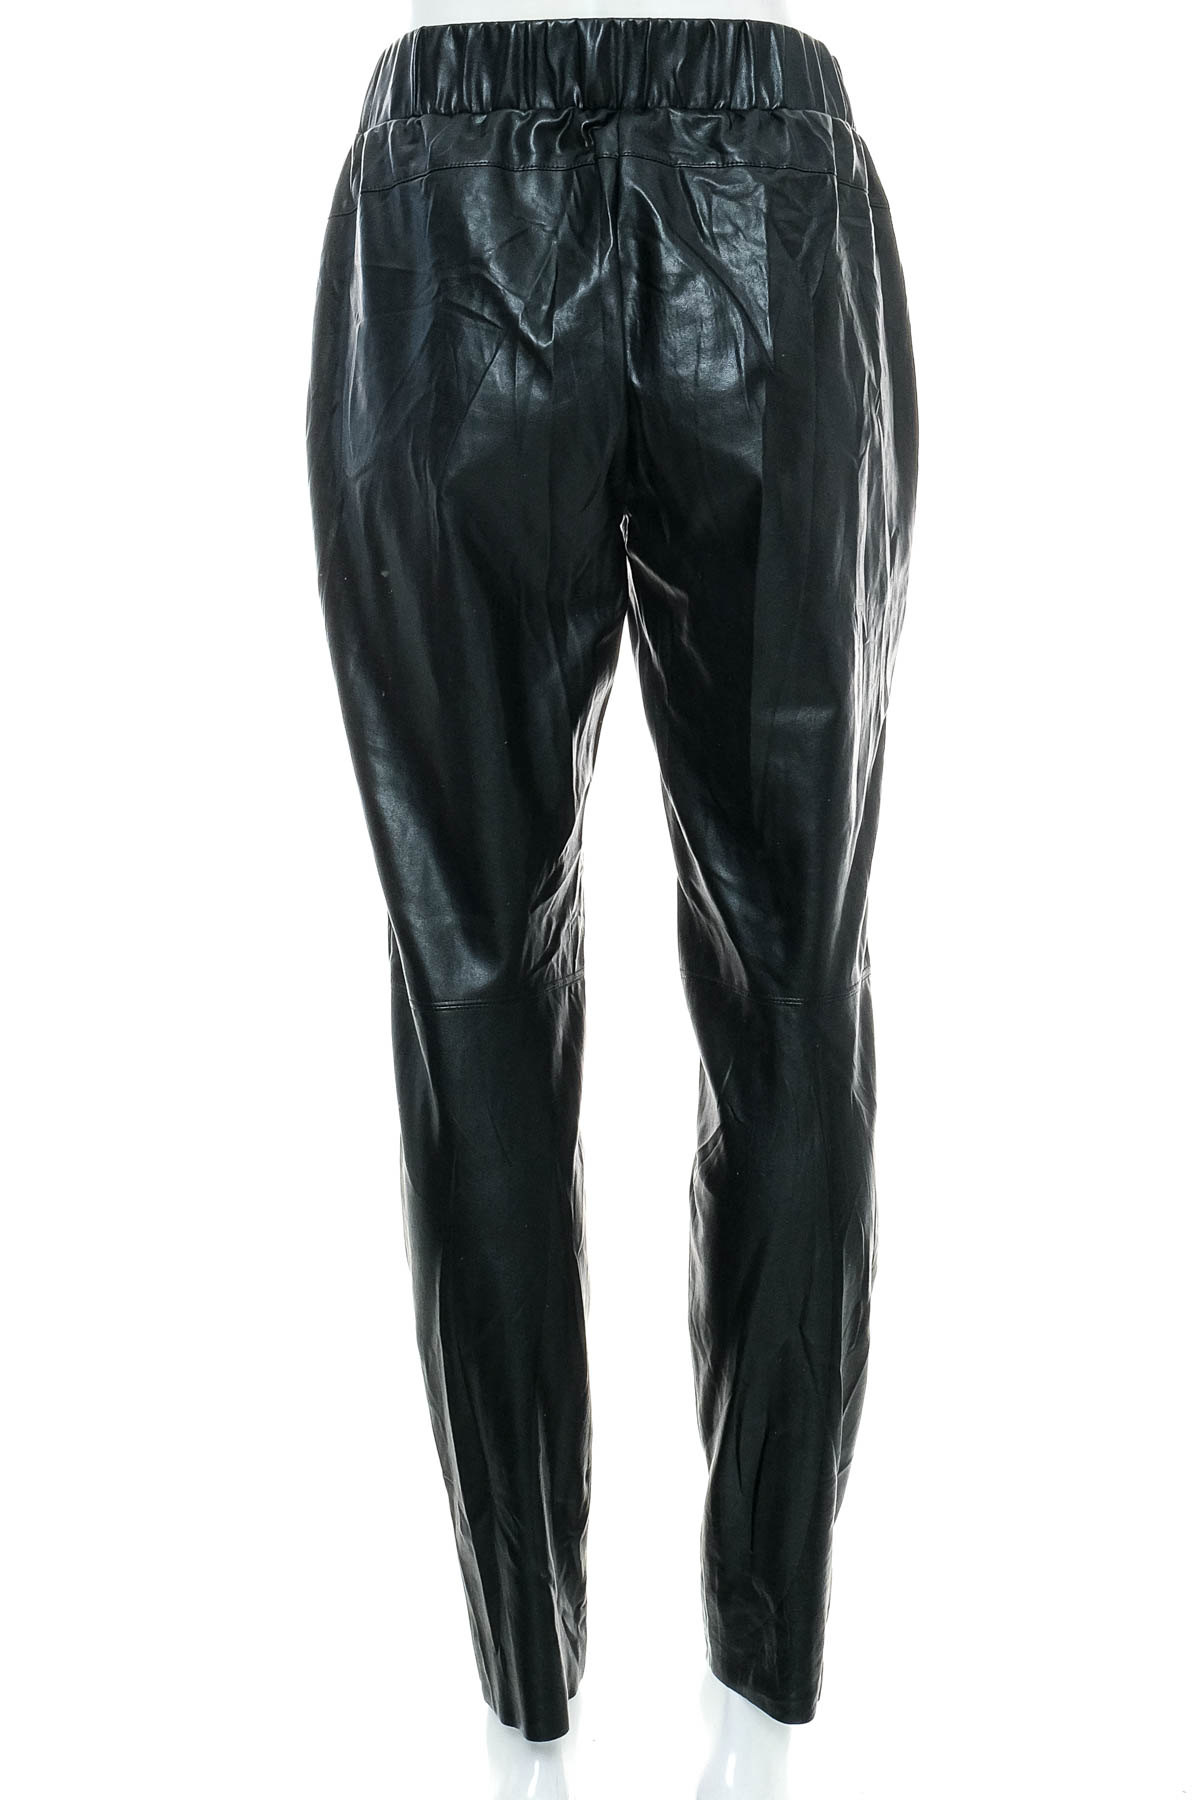 Women's leather trousers - MARC CAIN - 1